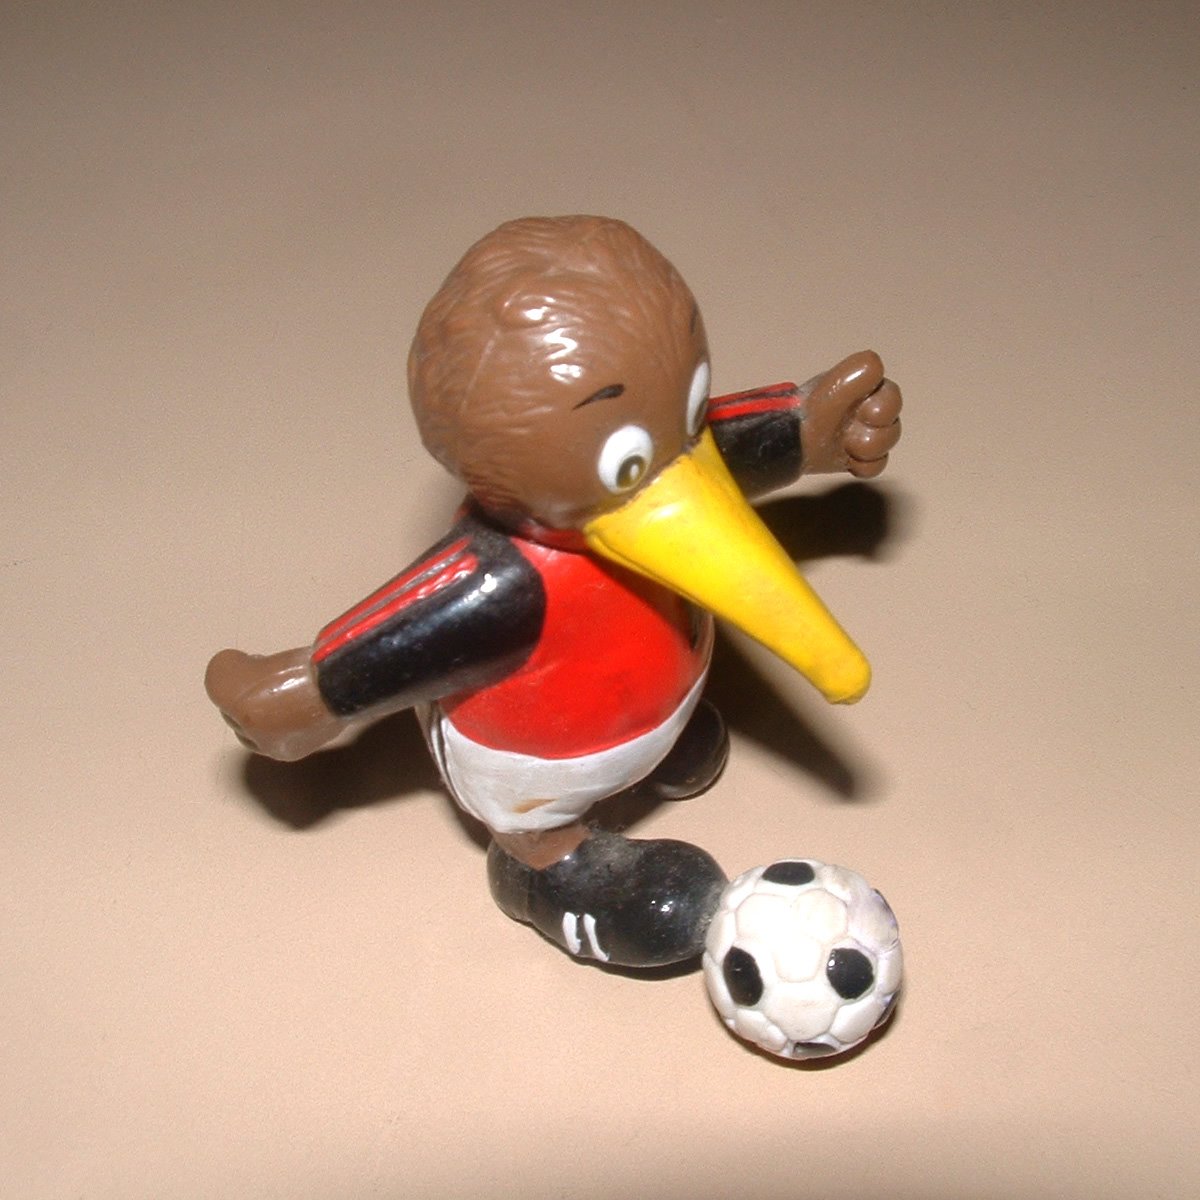 a toy figure holds a plastic football and has a yellow yellow beak